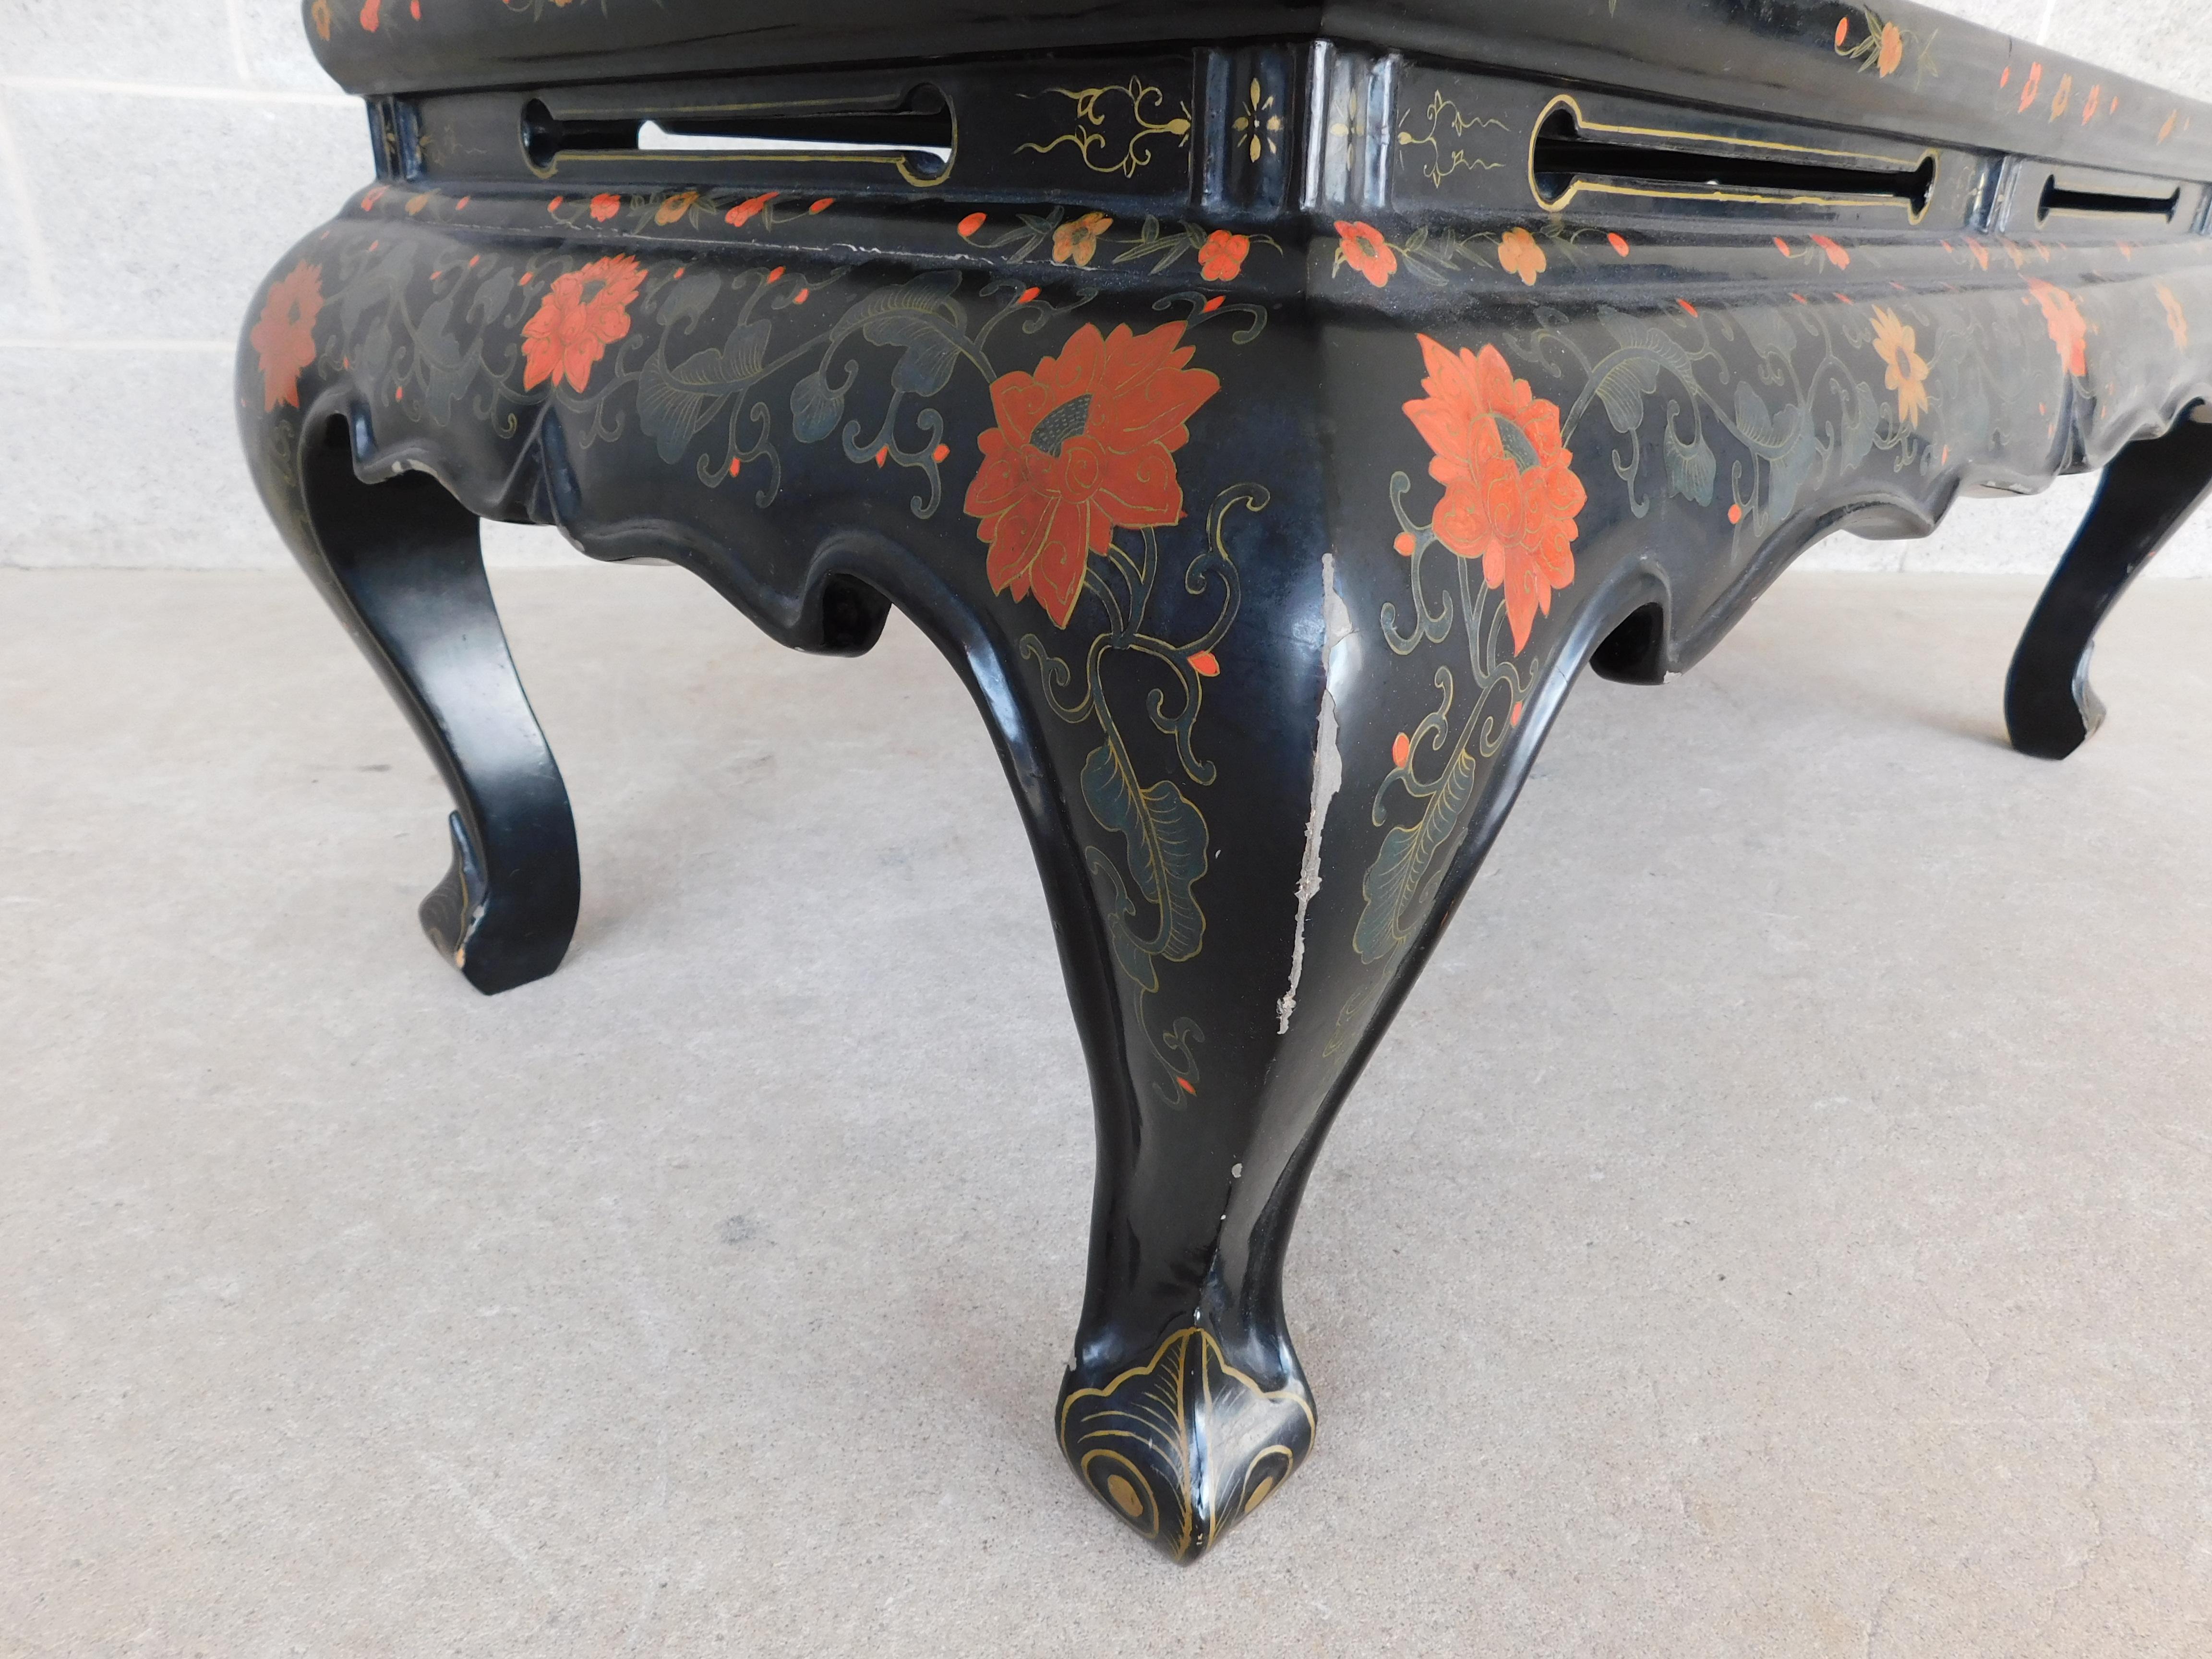 Peoples Republic of China midcentury vintage chinoiserie lacquered inlaid motif coffee table. Inlaid flowers, blossoms and vines, in vibrant blues, orange, white, with soft undertones of grays and soft reds. Hand painted accents, and pierced apron